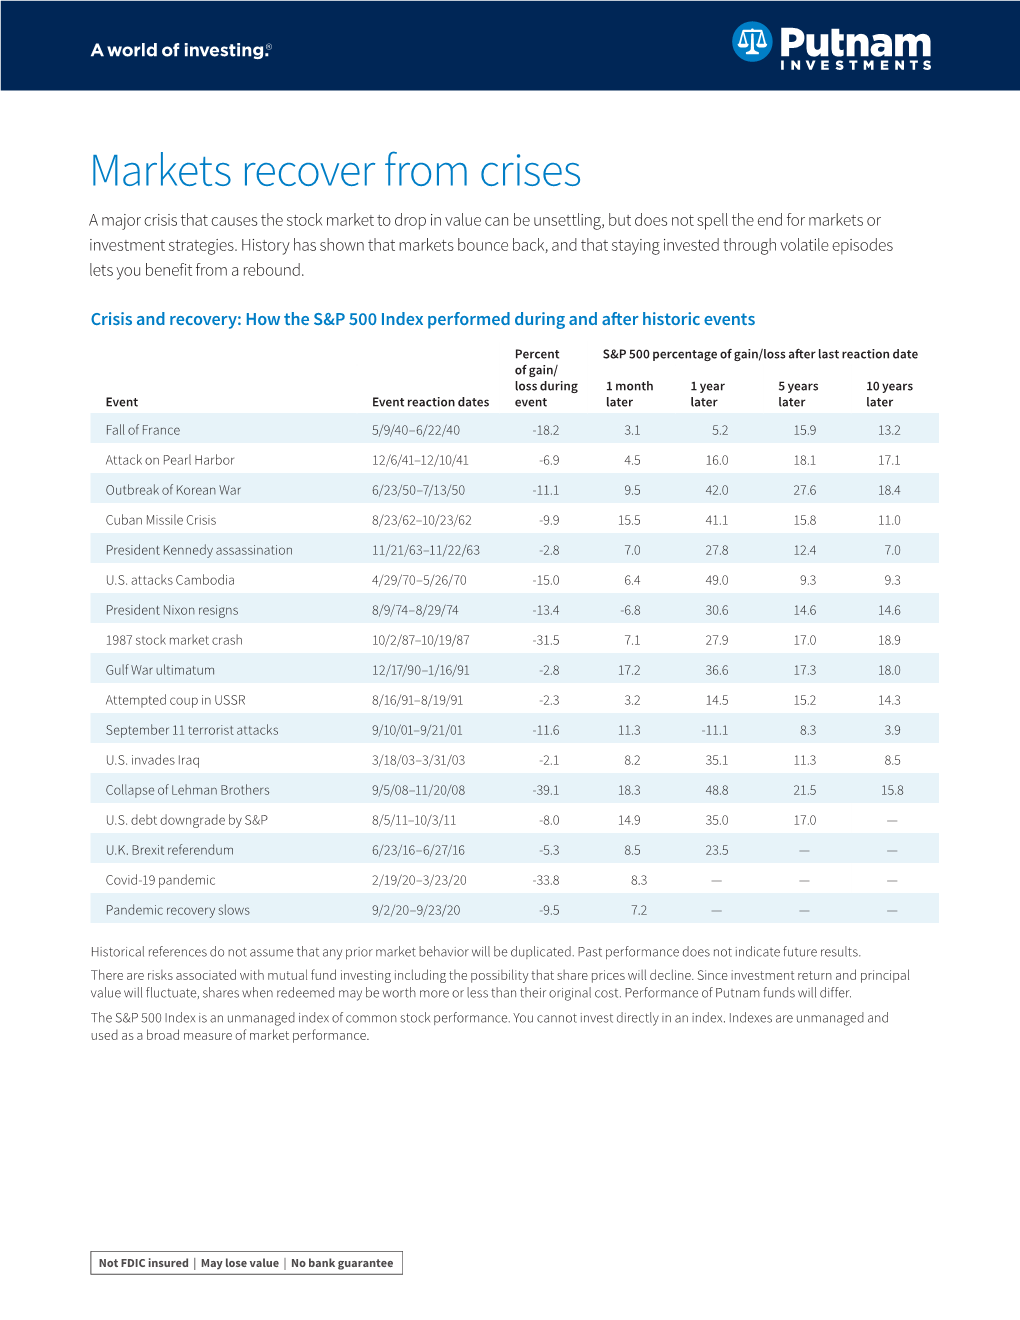 Investor Education: Markets Recover from Crises